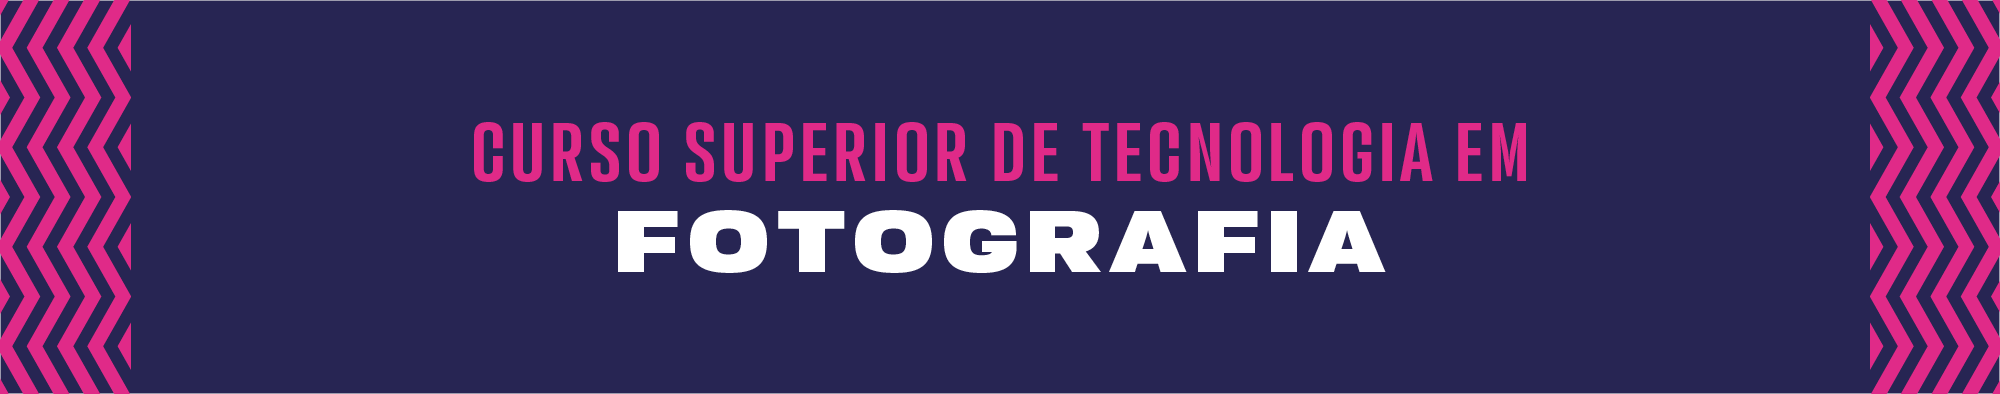 Banners cursos topo8.png